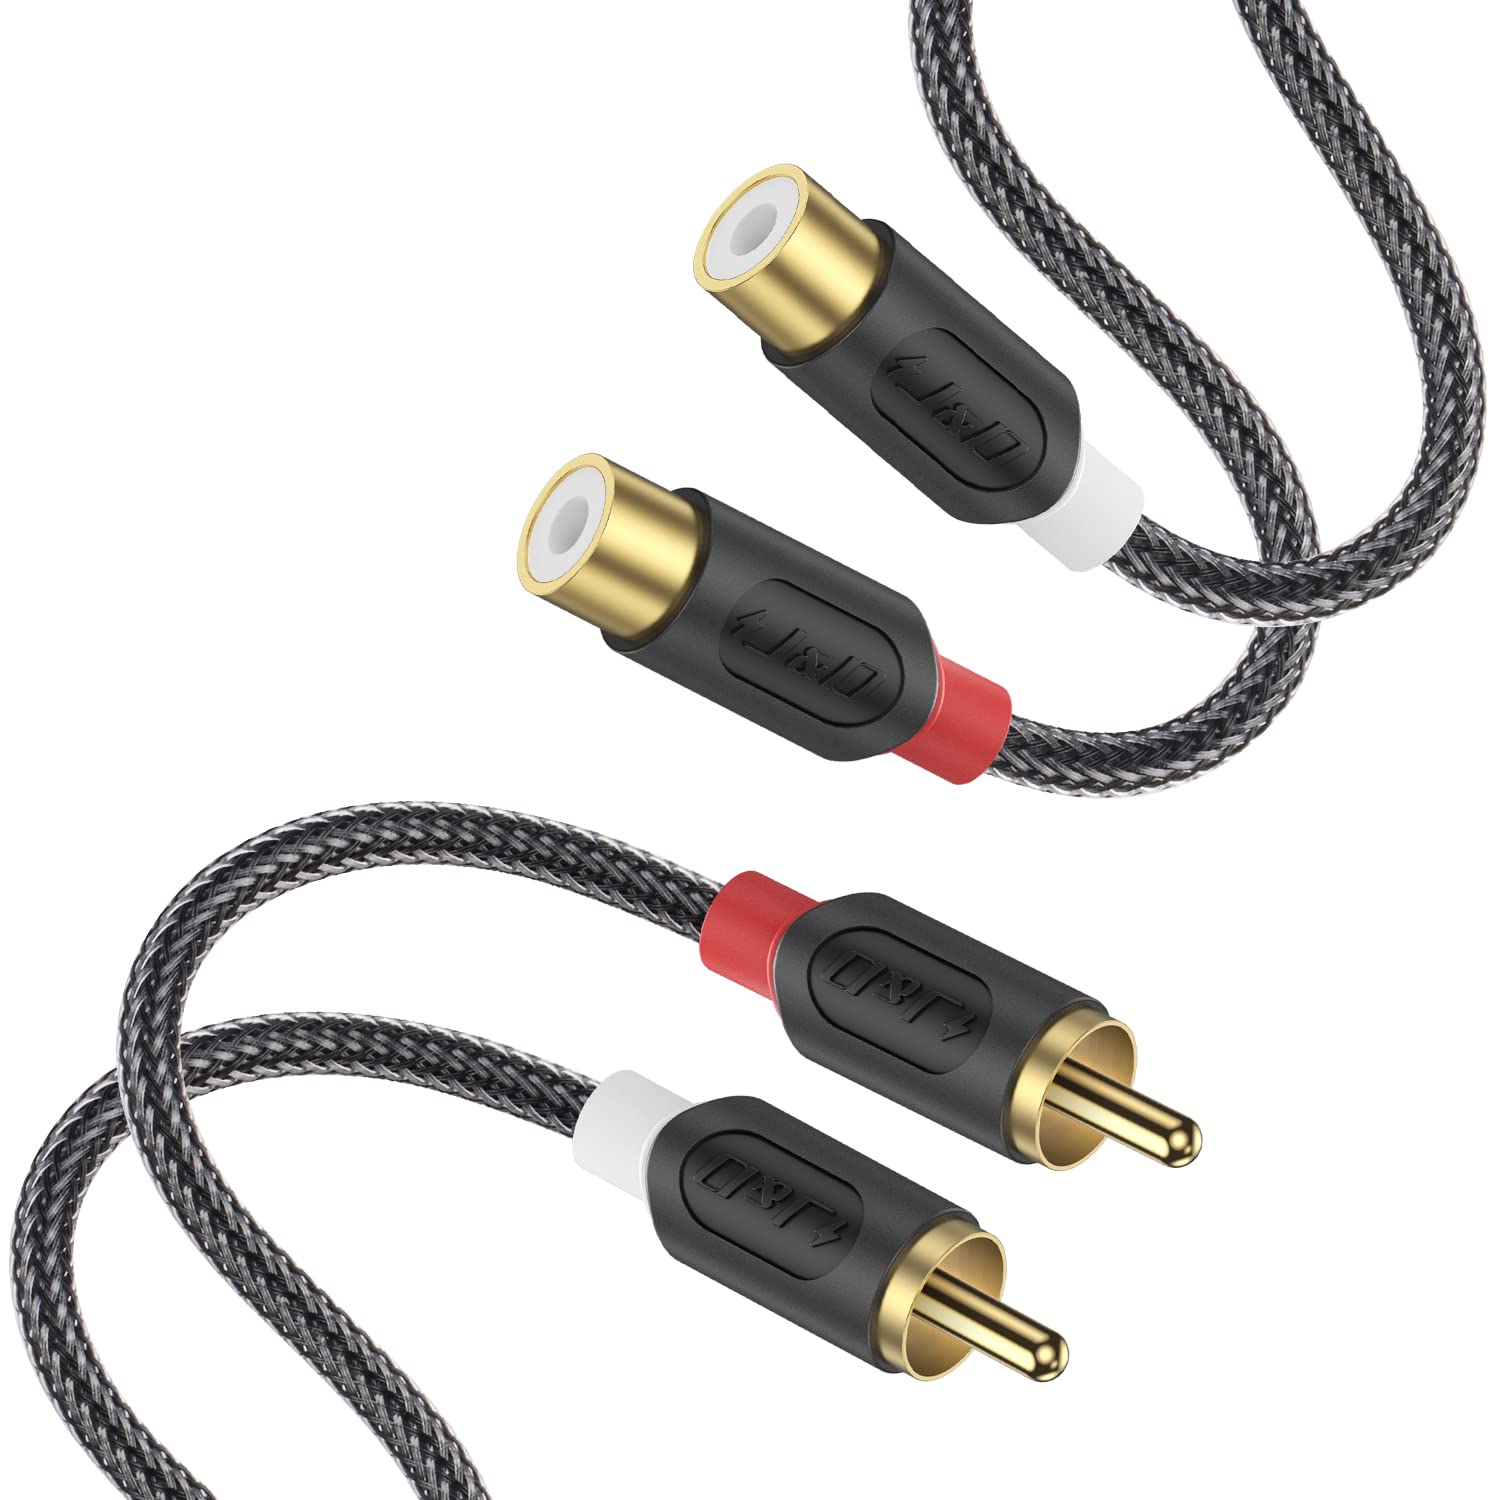 J&D 2 RCA Male to 2 RCA Female Stereo Audio Extension Cable, PVC Shelled and Nylon Braid, 6ft - image 1 of 5